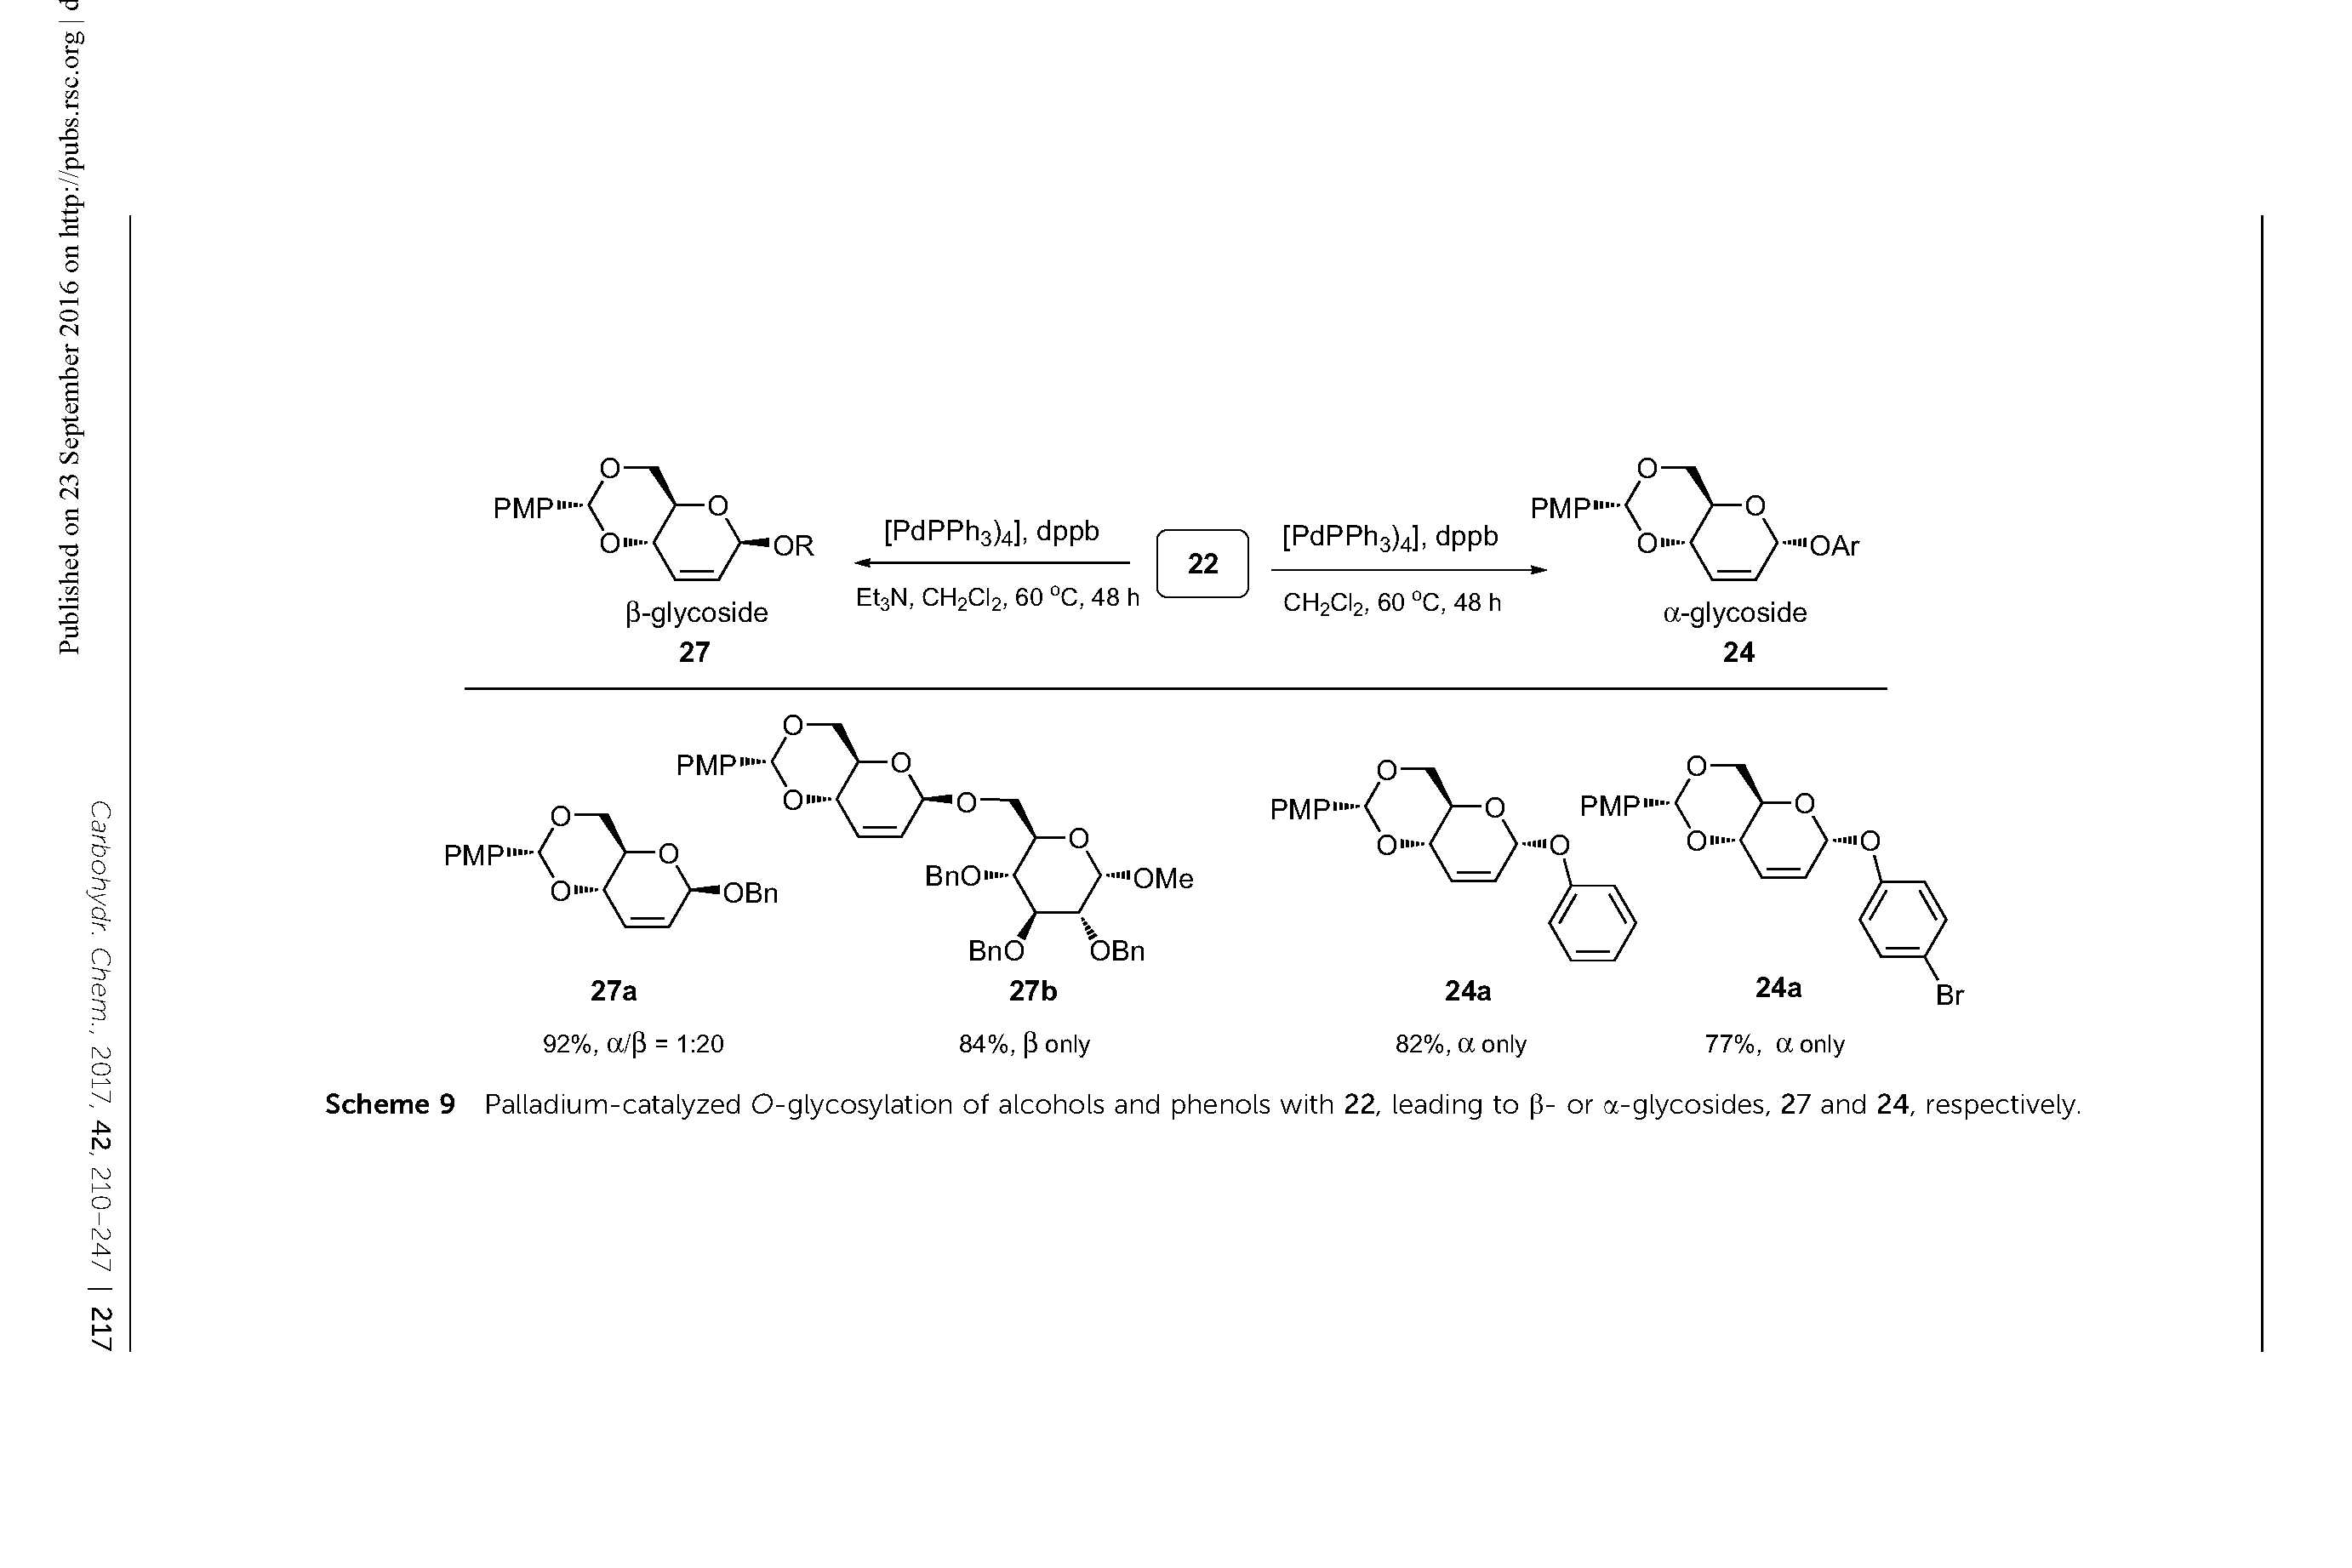 Scheme 9 Palladium-catalyzed O-glycosylation of alcohols and phenols with 22, leading to p- or a-glycosides, 27 and 24, respectively.